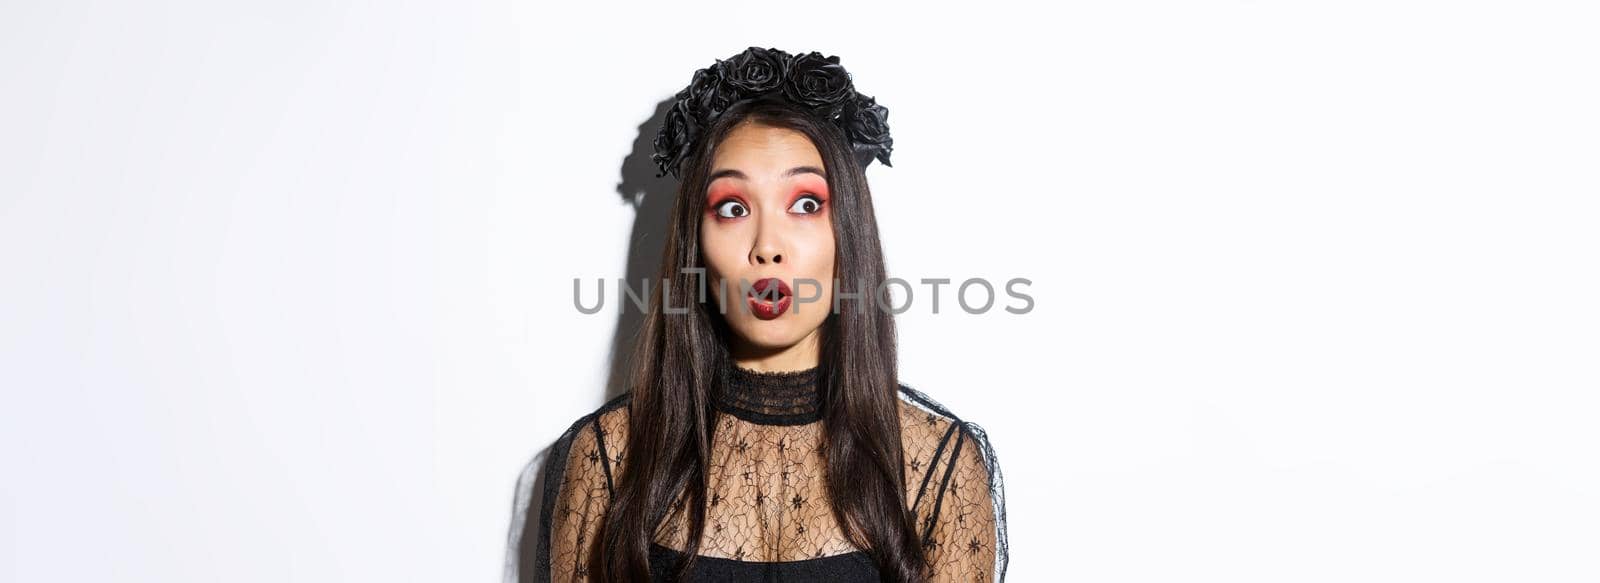 Close-up of surprised asian woman in witch costume looking at upper left corner and open mouth wondered, standing over white background.